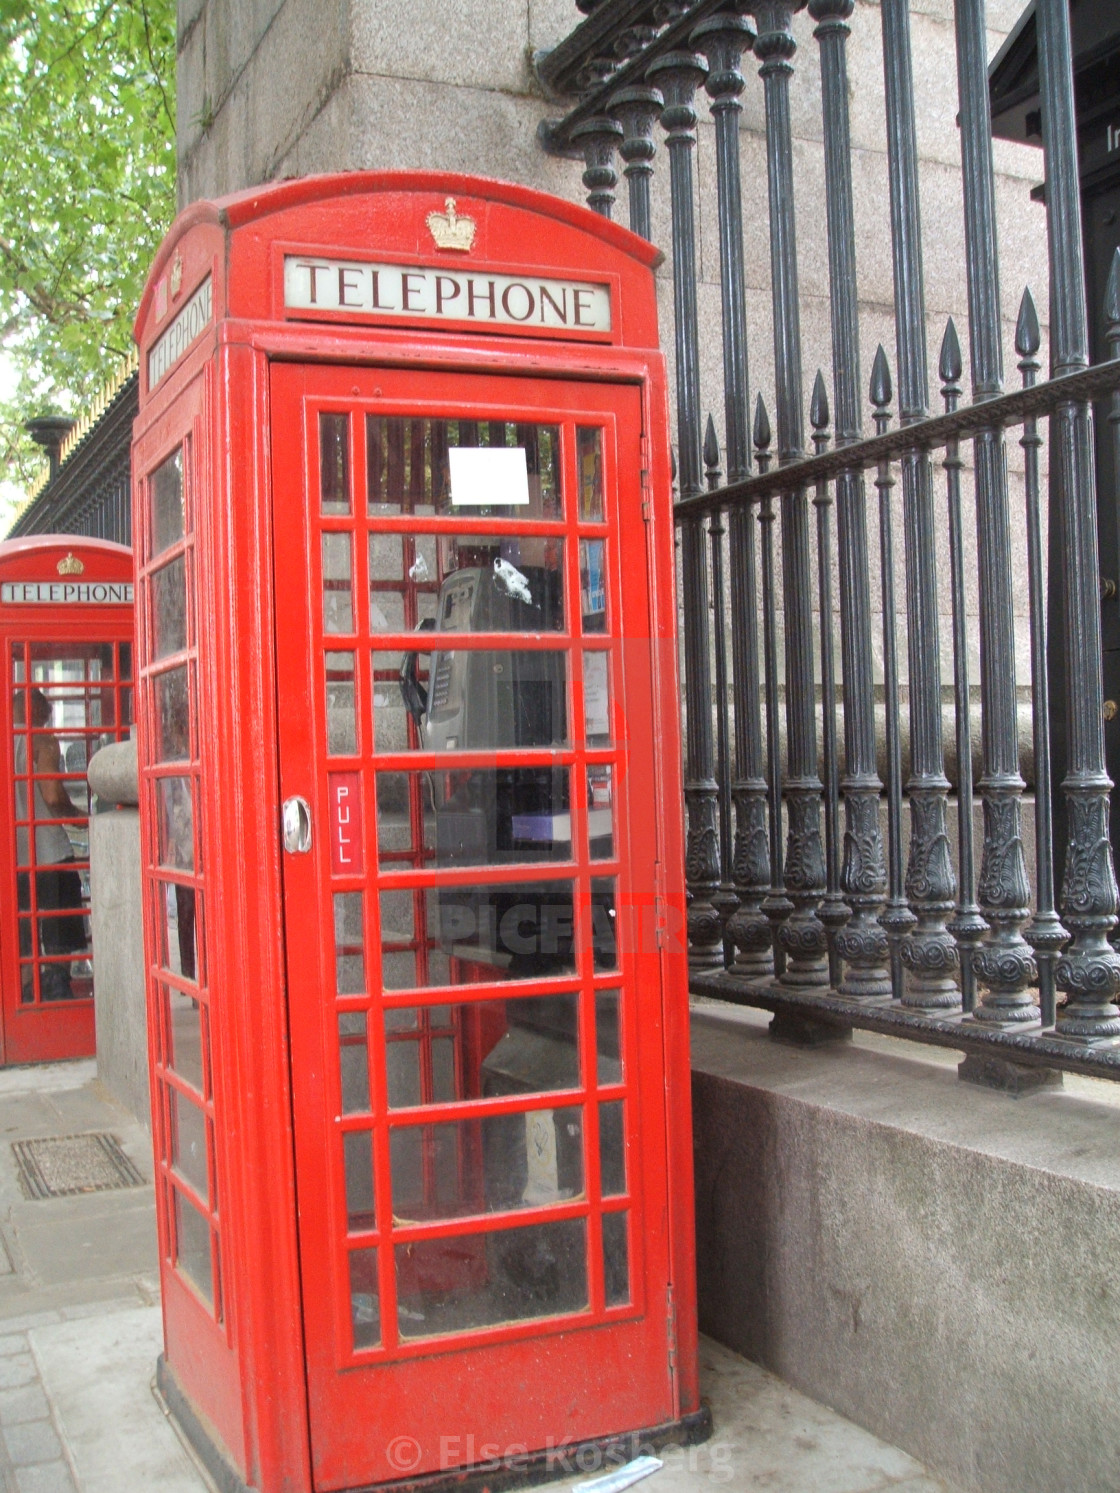 "Red phone booth in London" stock image